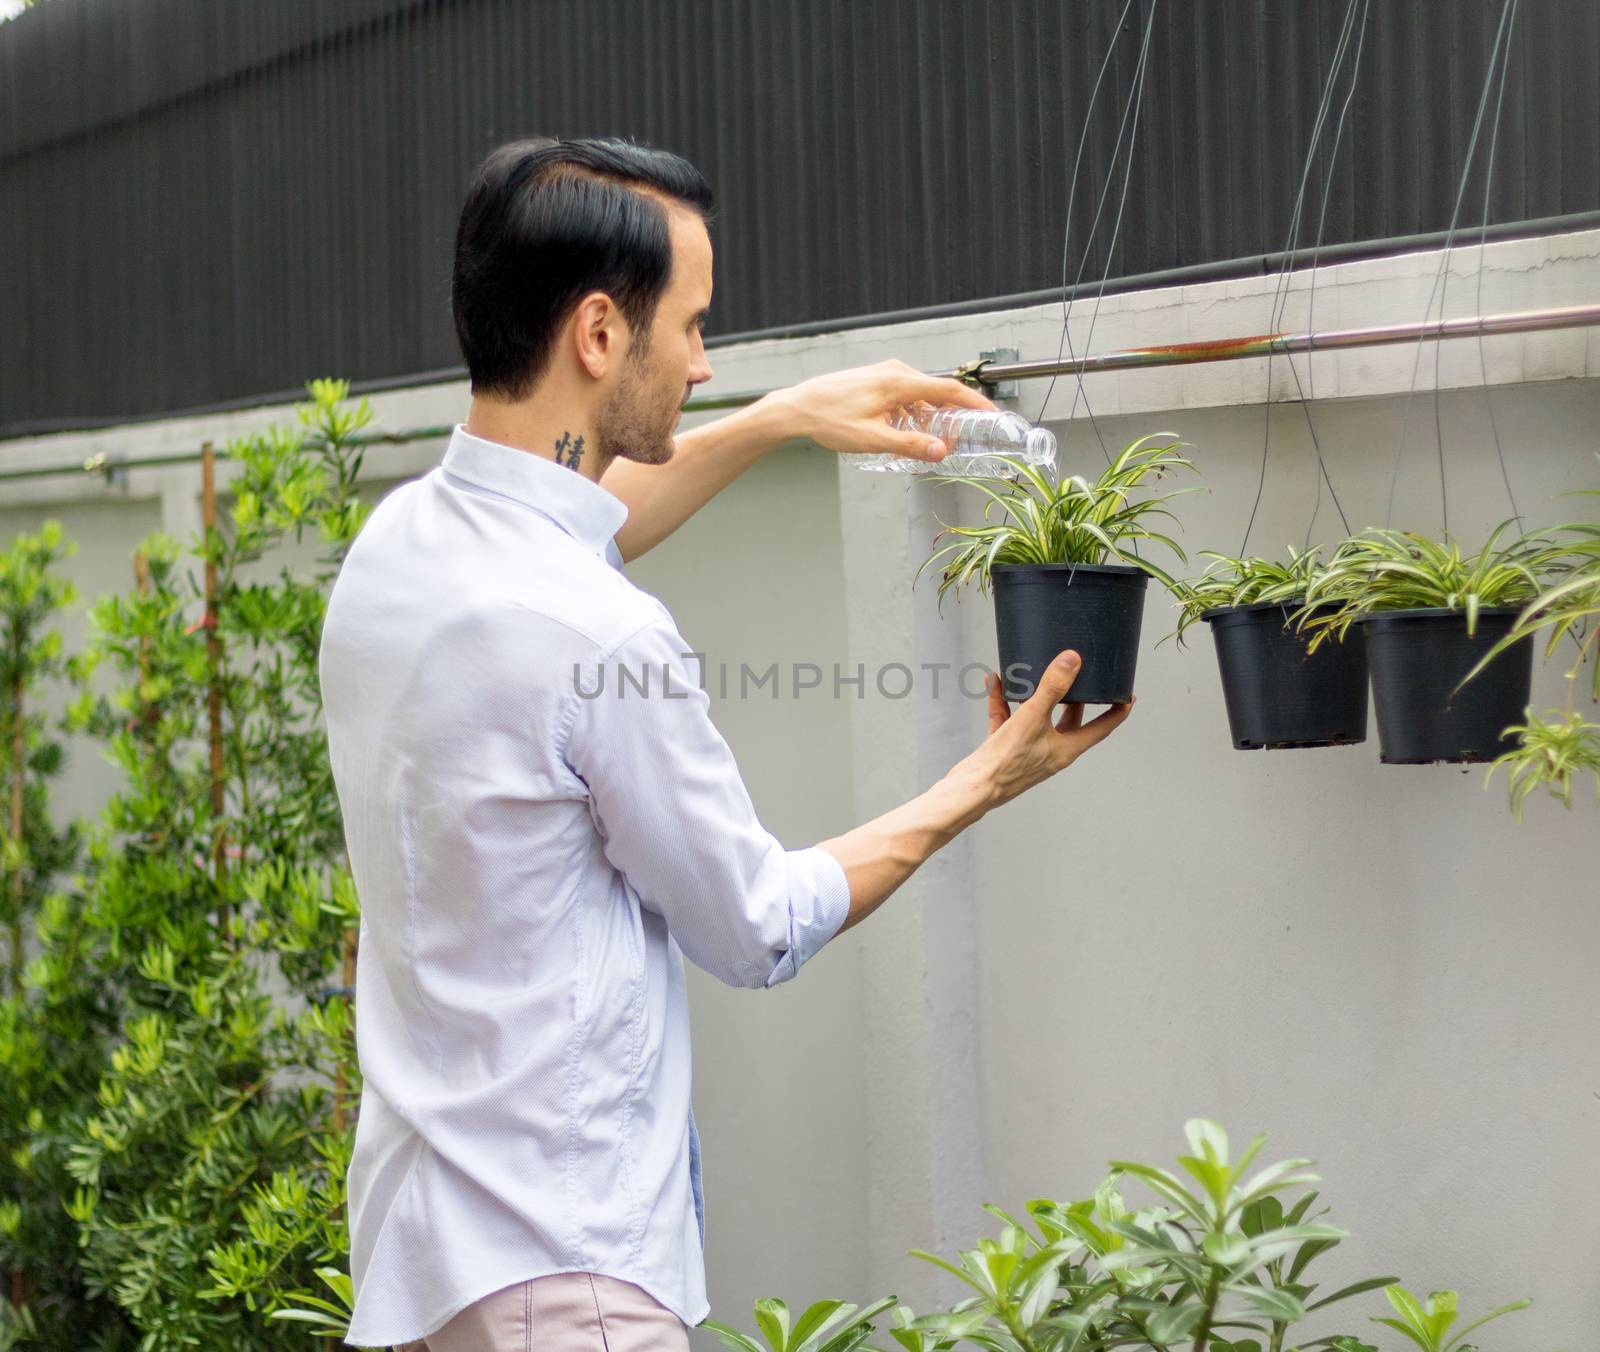 Young men watering plants in potted plants With recyclable plastic bottles When watering the plants, he twisted the plastic bottles to recycle.Young man working in the garden by minamija